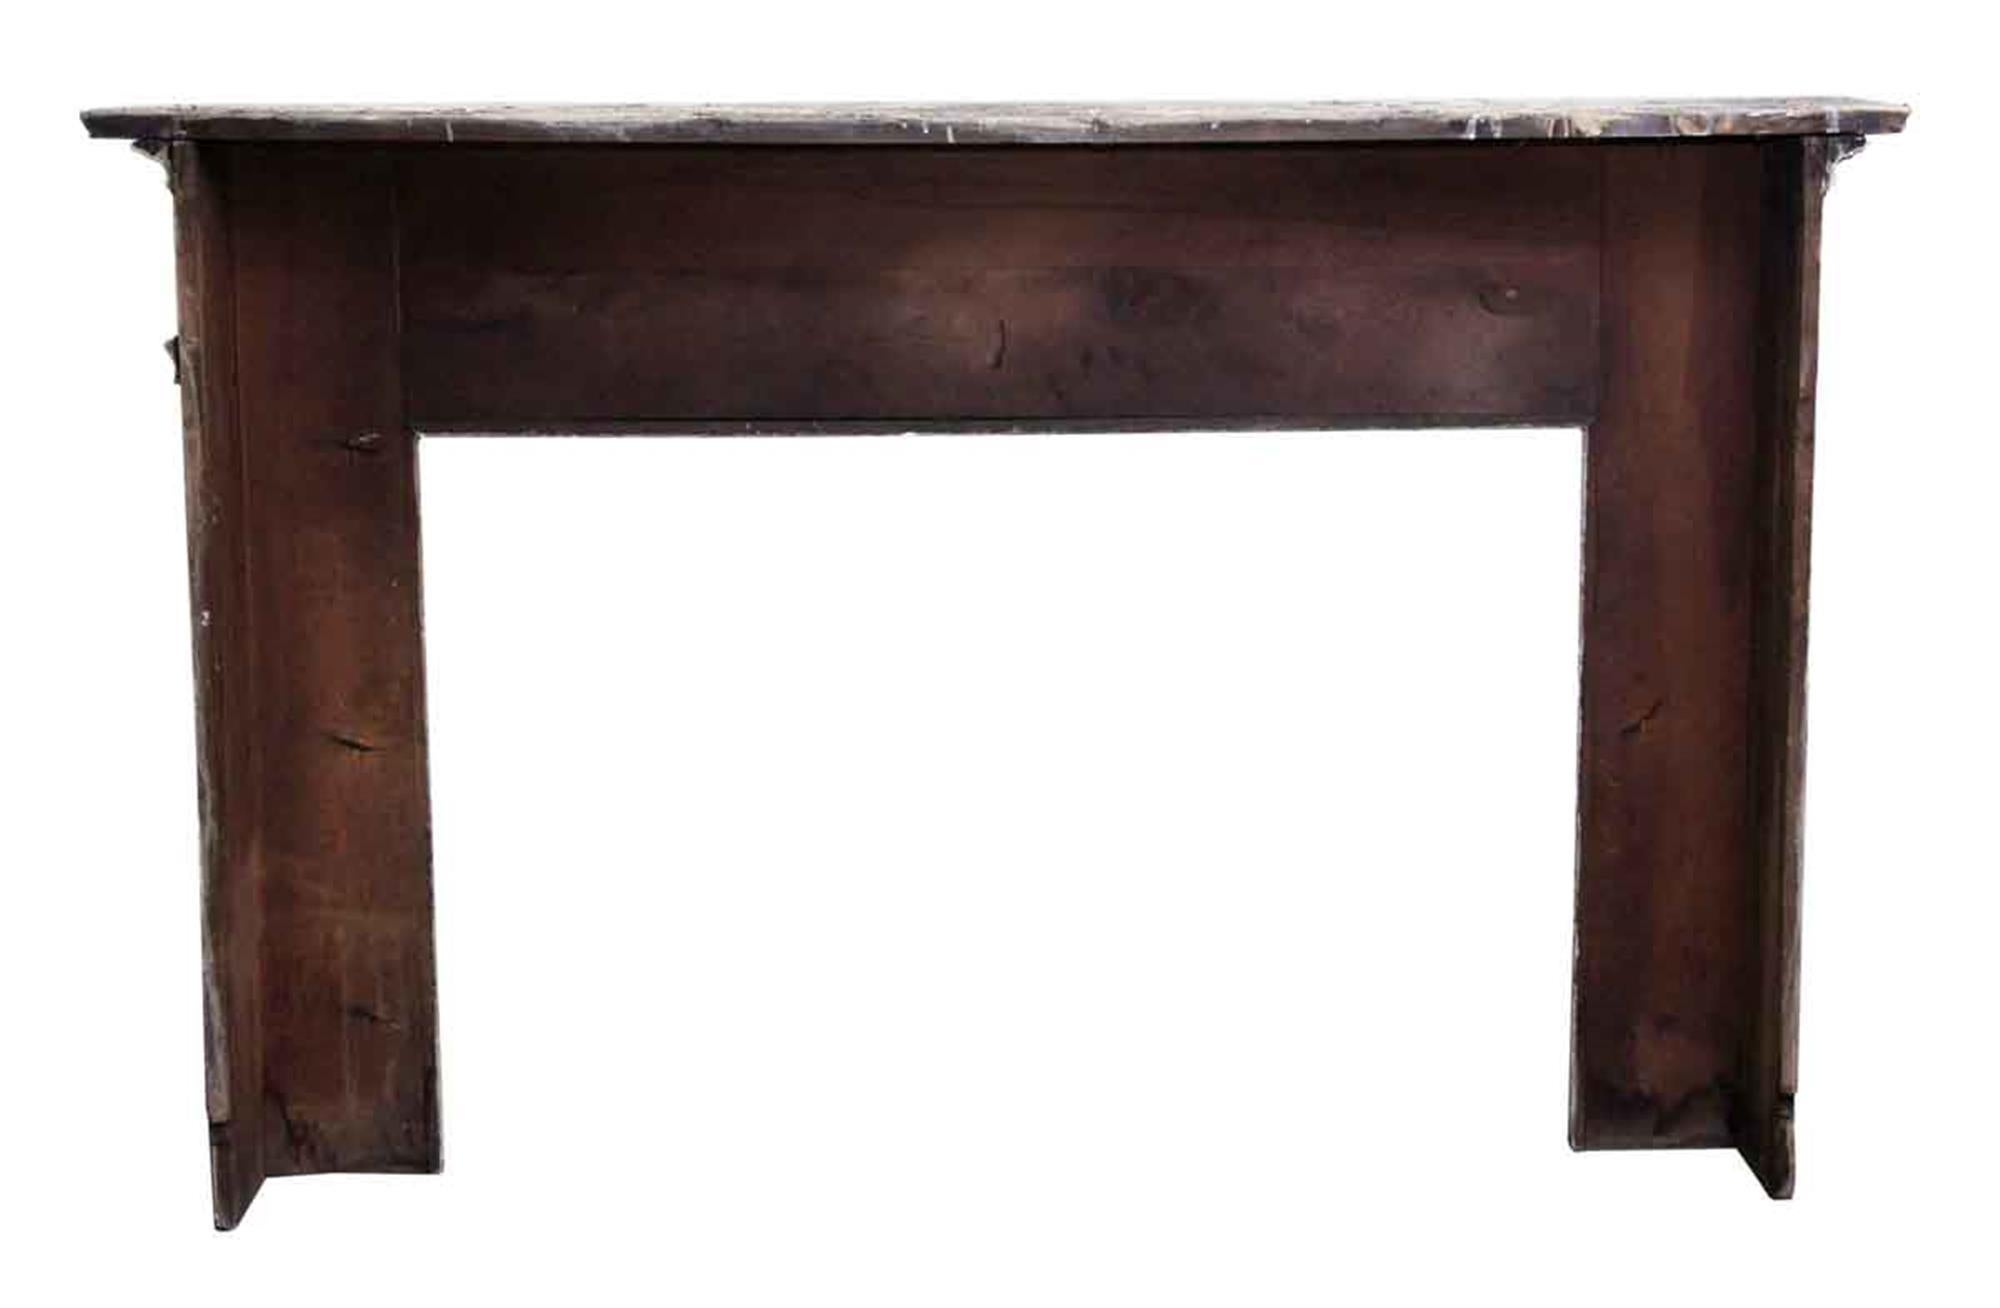 1900s Carved Wood Federal Mantel with Garland Design and White Crackle Paint 3